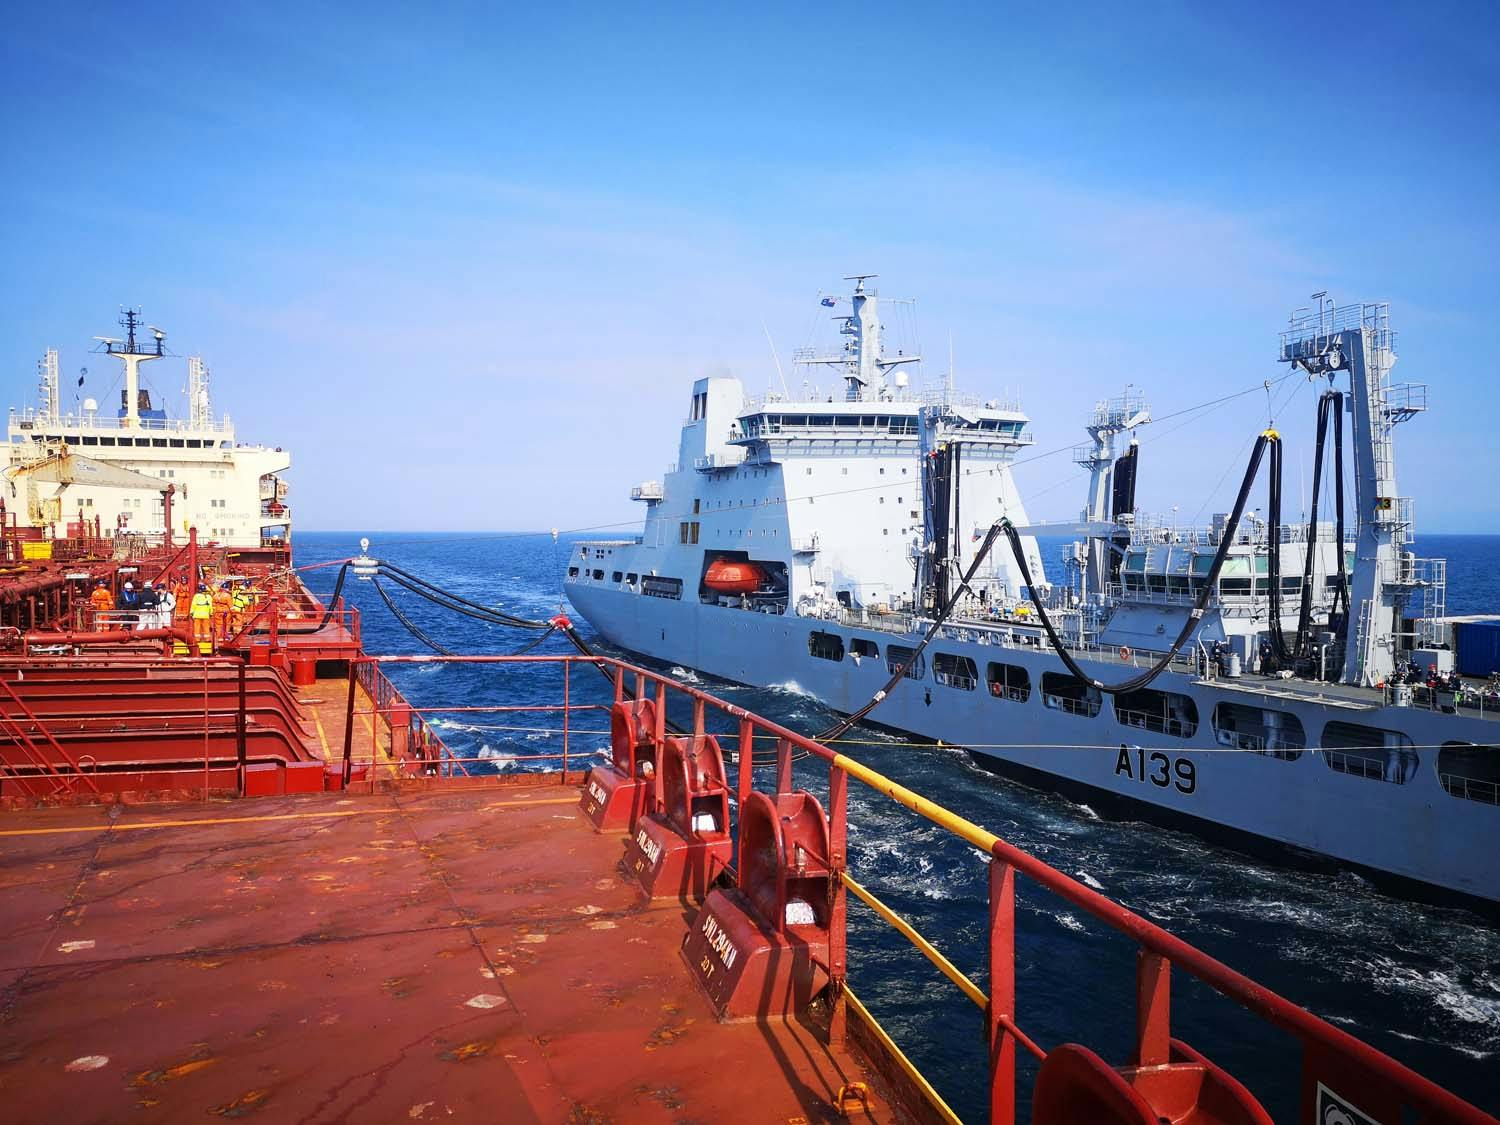 Tideforce conducts replenishment trials with commercial tanker